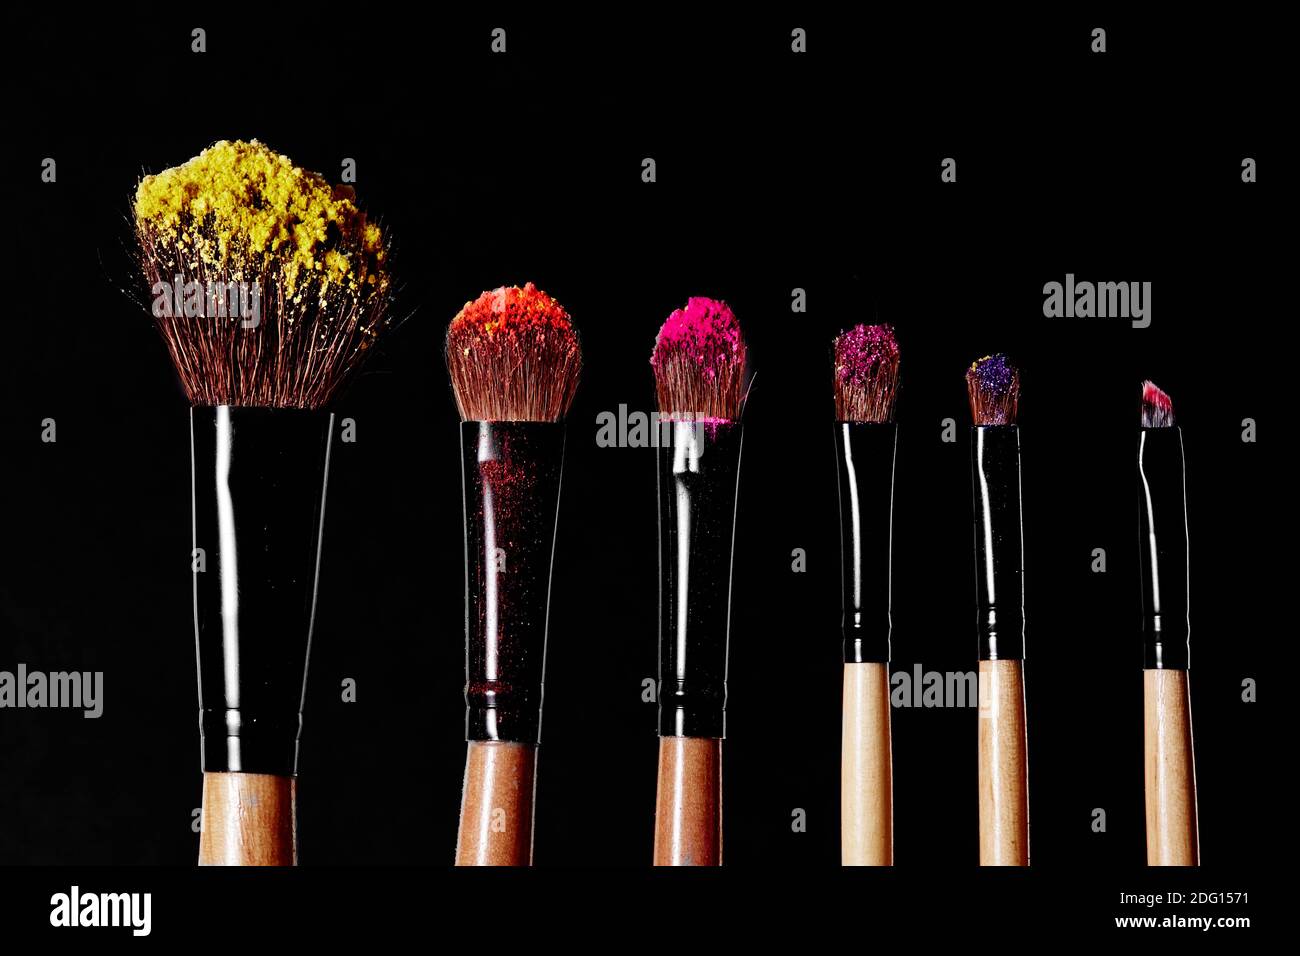 Make-up tools. Brush for makeup. Cosmetic brushes on black with bright dust splash. Colorful shadows pigment. Stock Photo